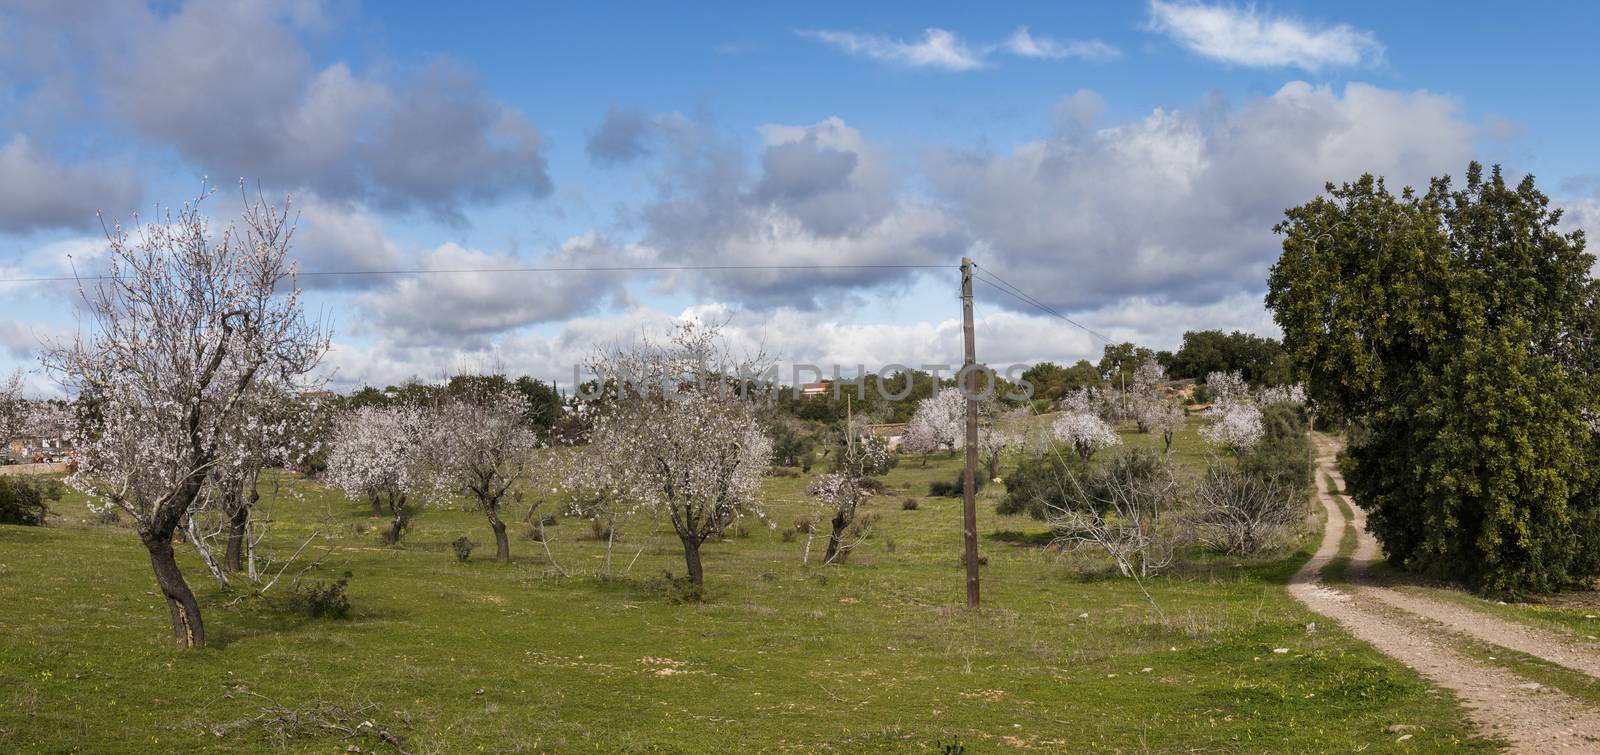 Beautiful almond trees on the countryside, located on the Algarve region, Portugal.